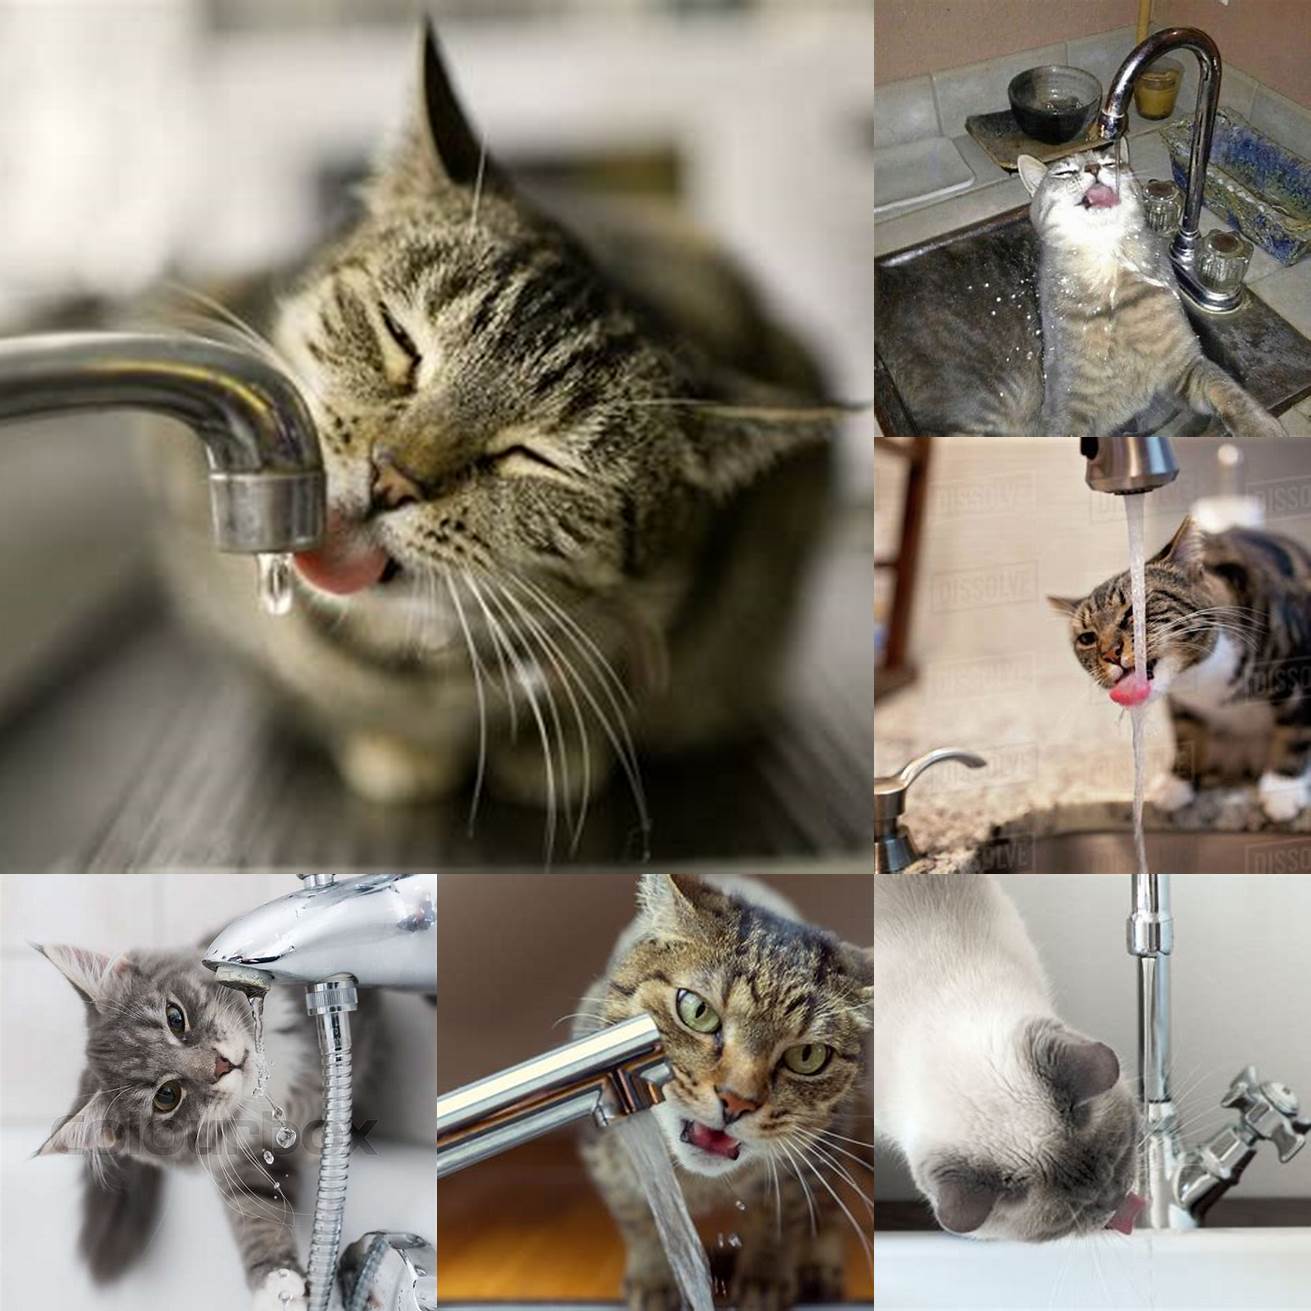 Cat drinking from a faucet